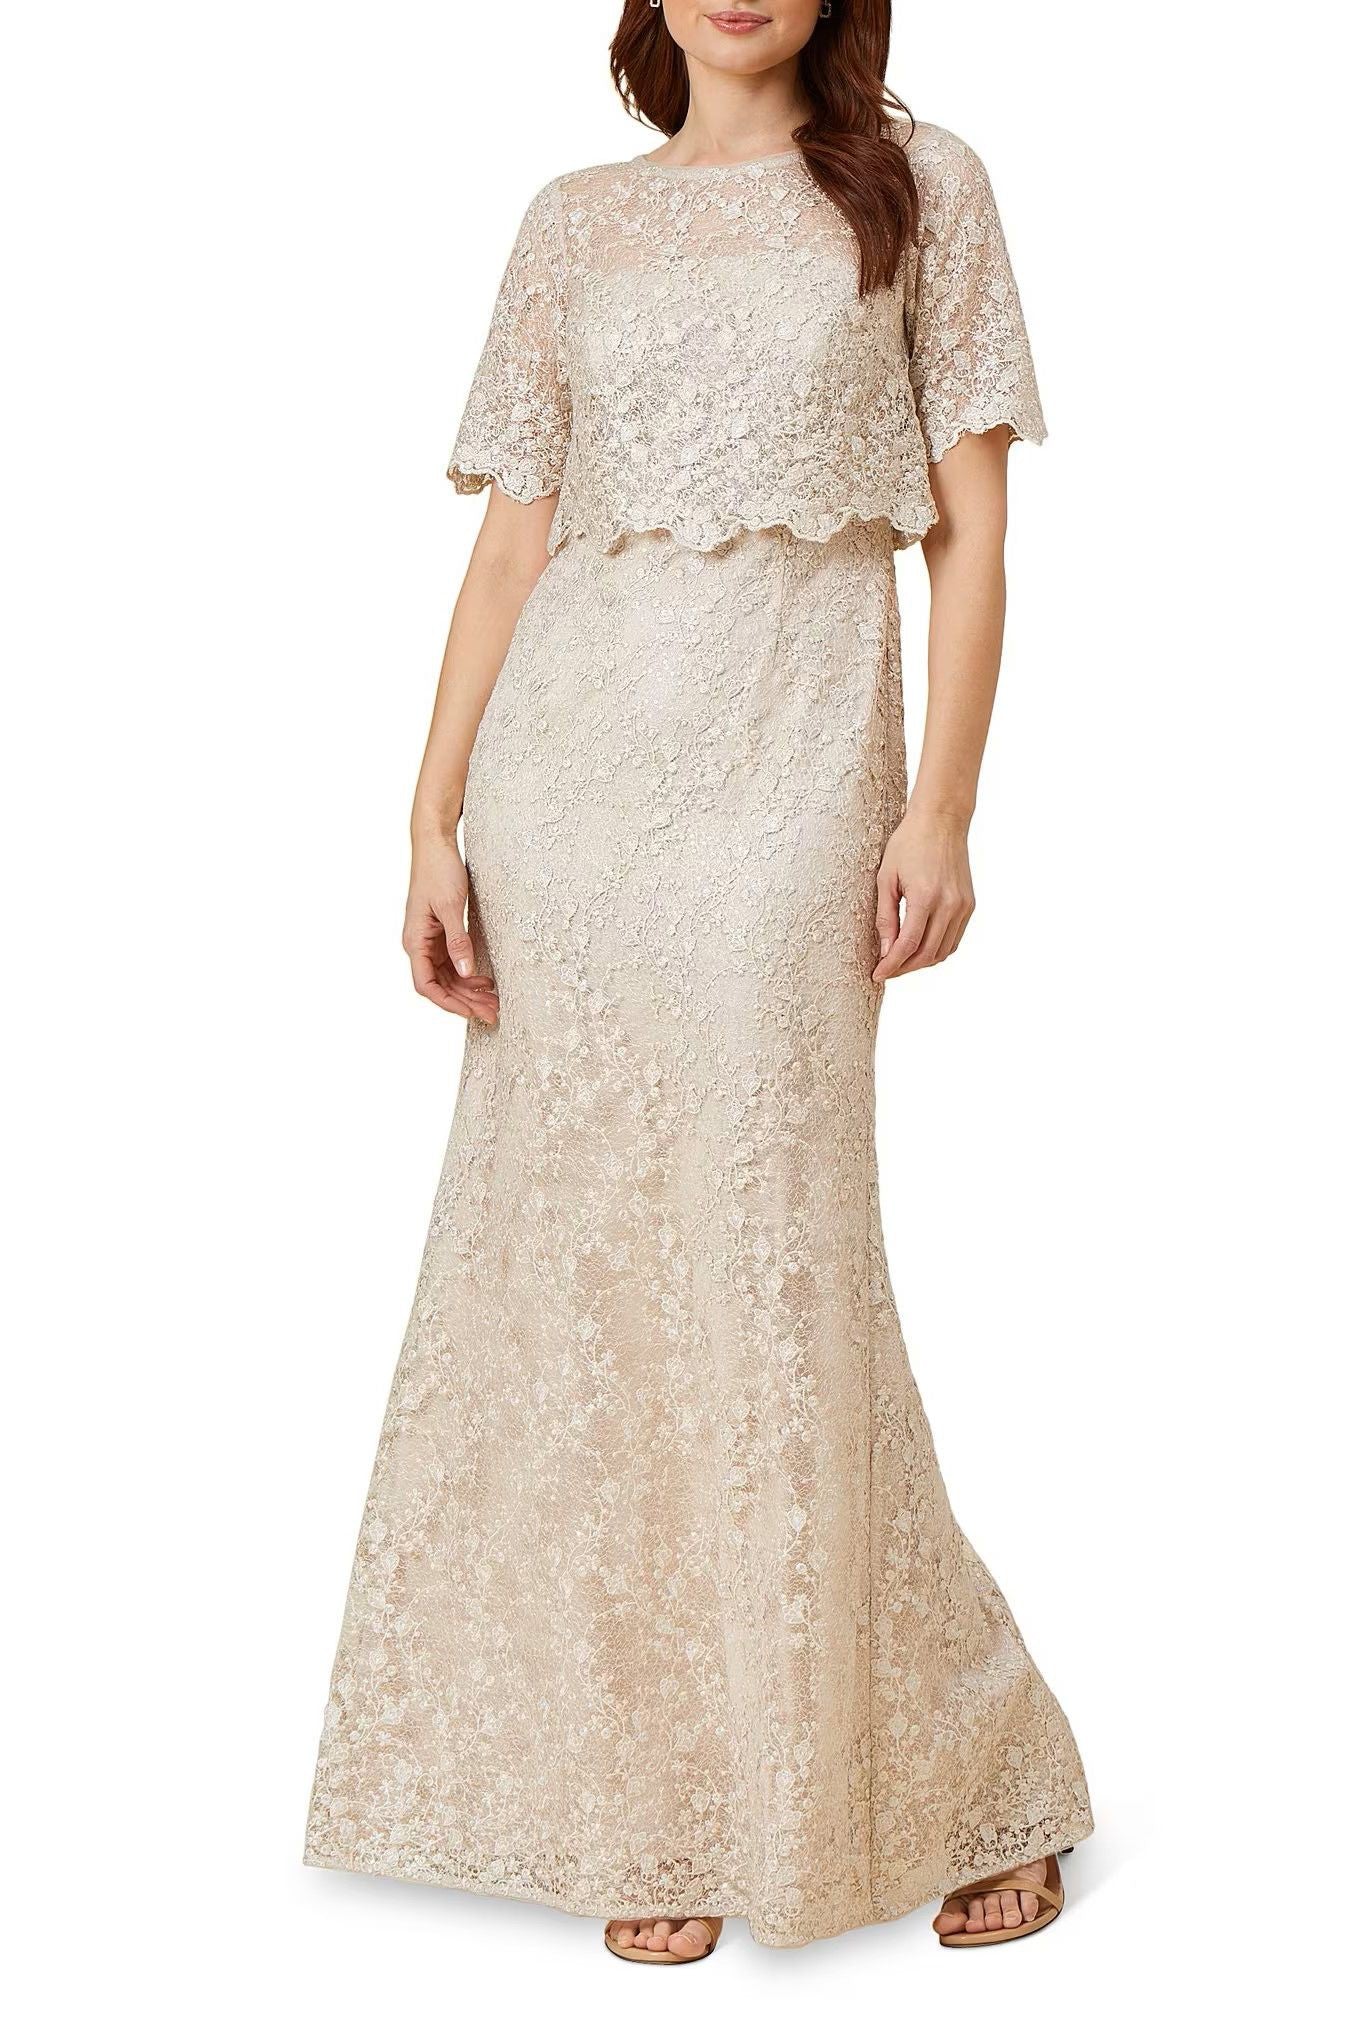 Adrianna Papell A-Line Short Sleeve Sequin Gown